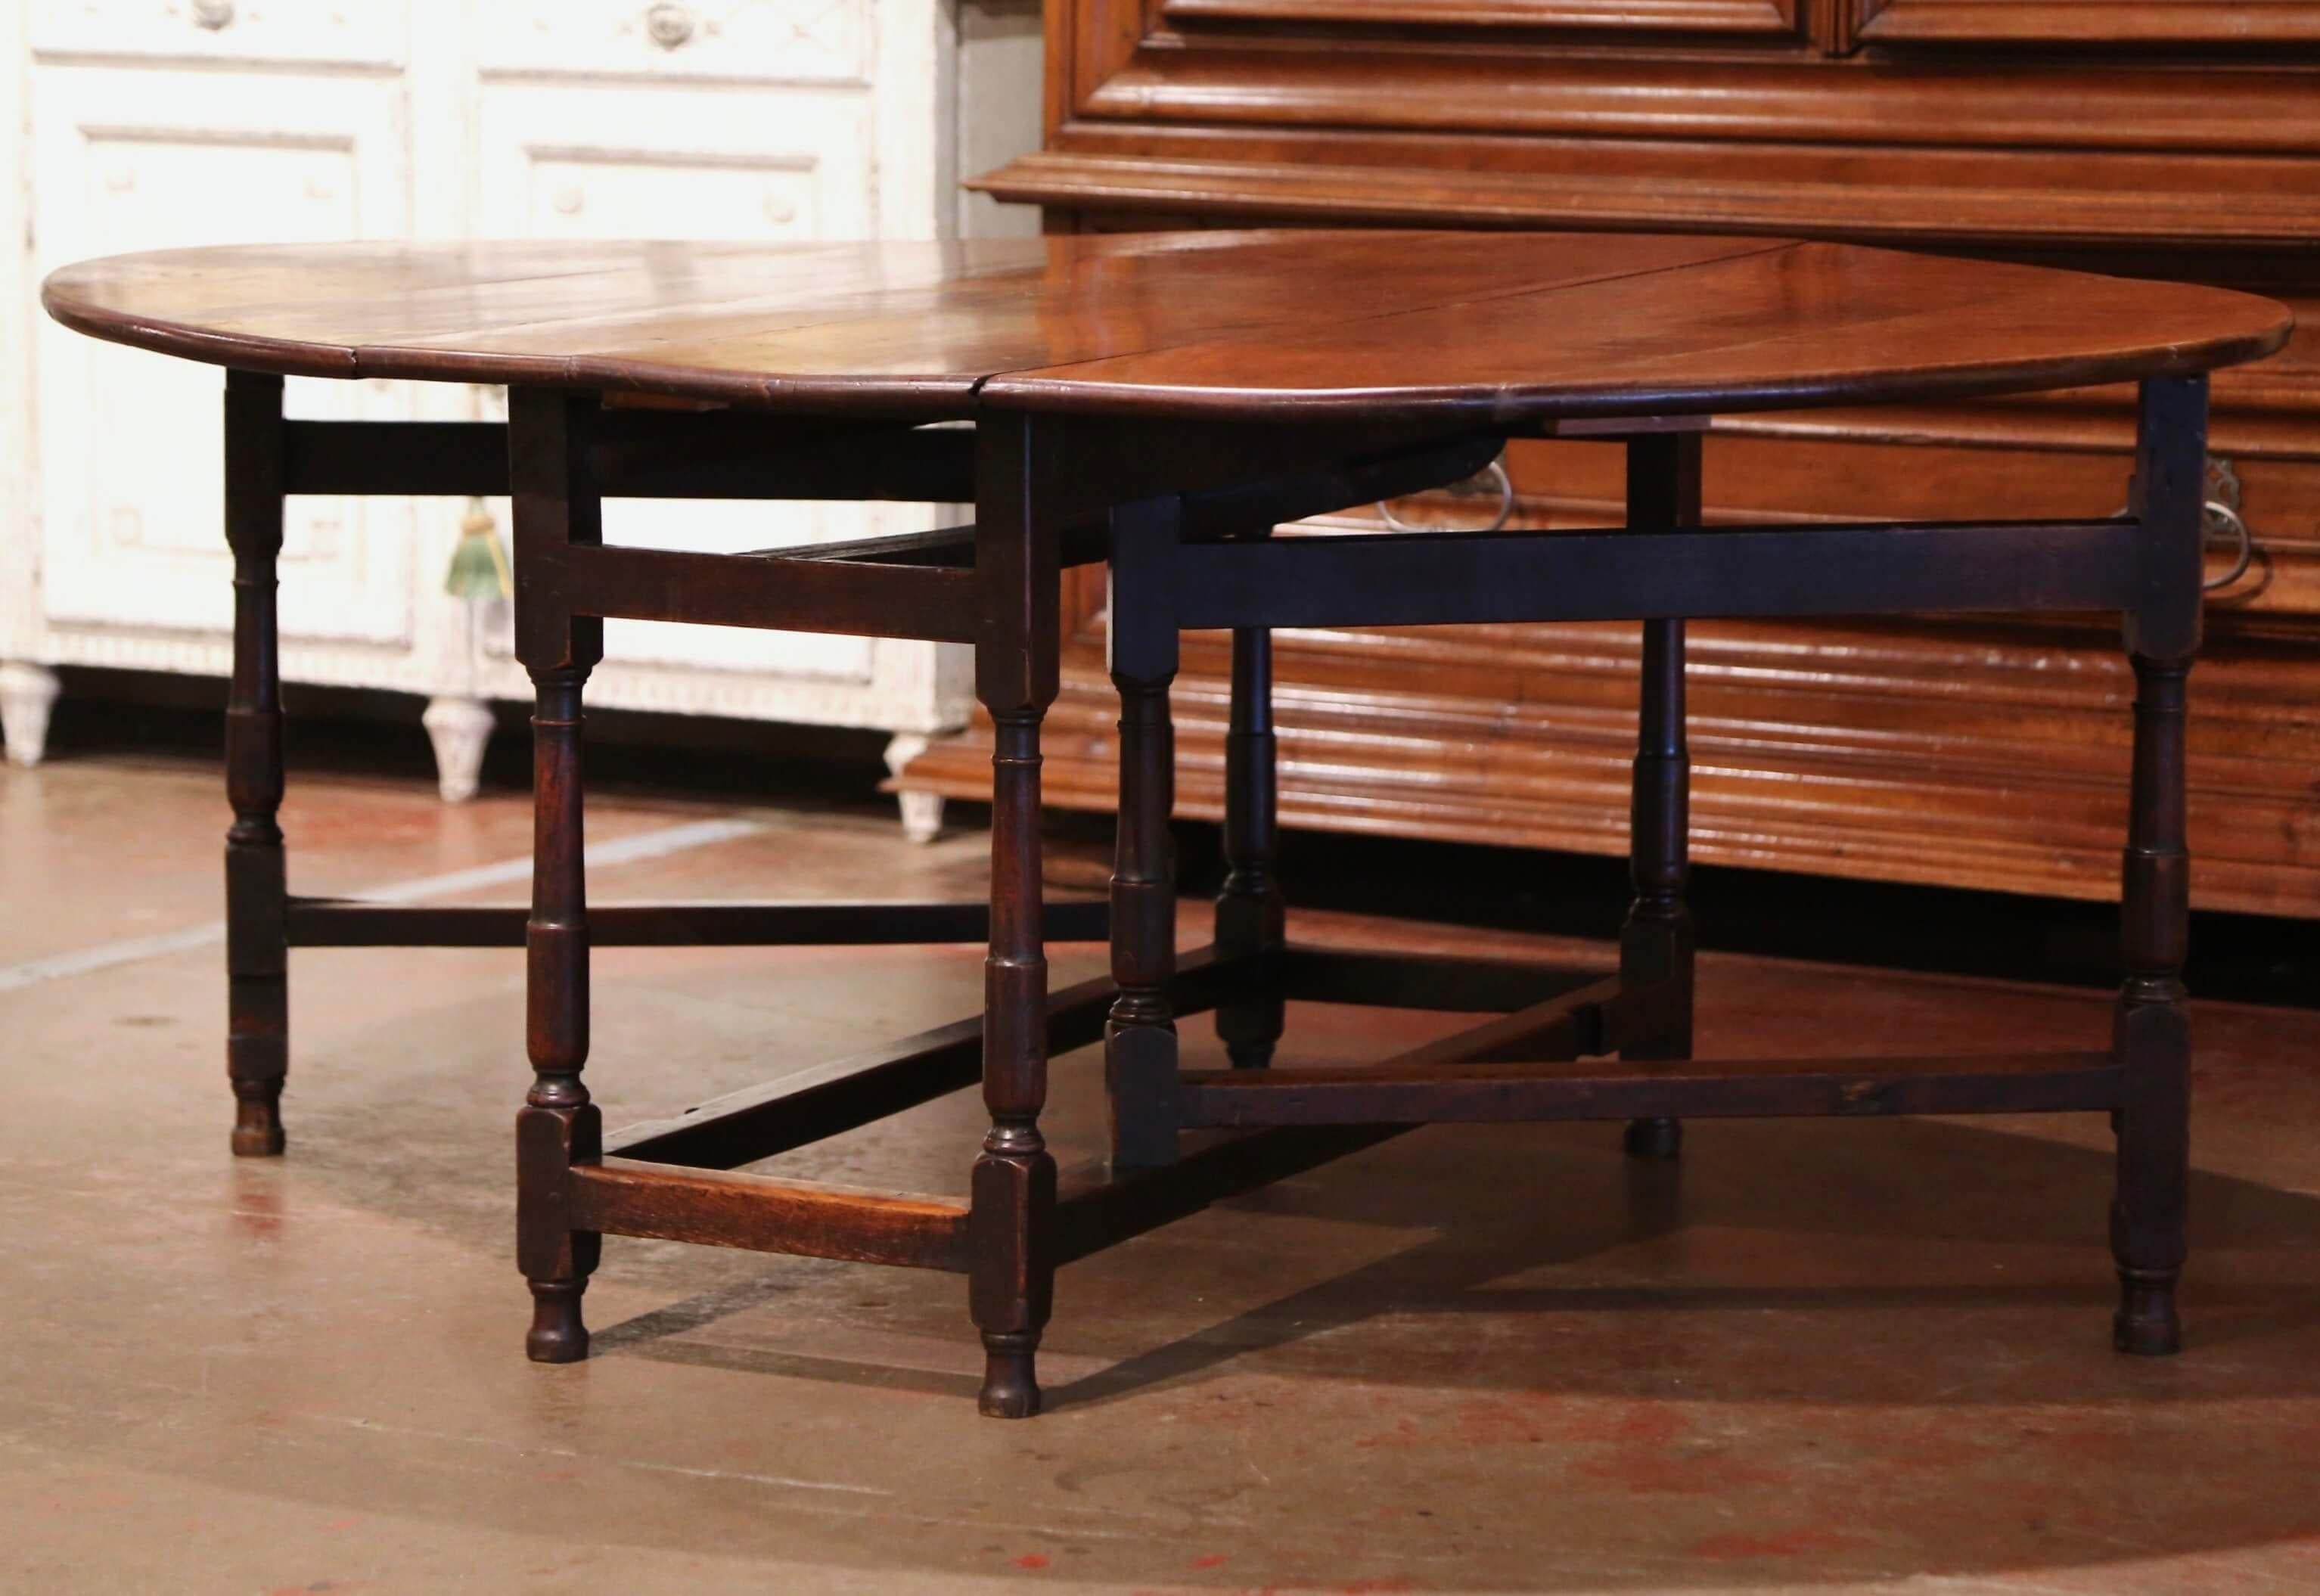 Crafted in England from solid oak circa 1850, the drop-leaf table stands on turned legs embellished with a decorative stretcher at the bottom. The table has four extra legs that unfold, and two large drop leaves come up to make an elegant oval top